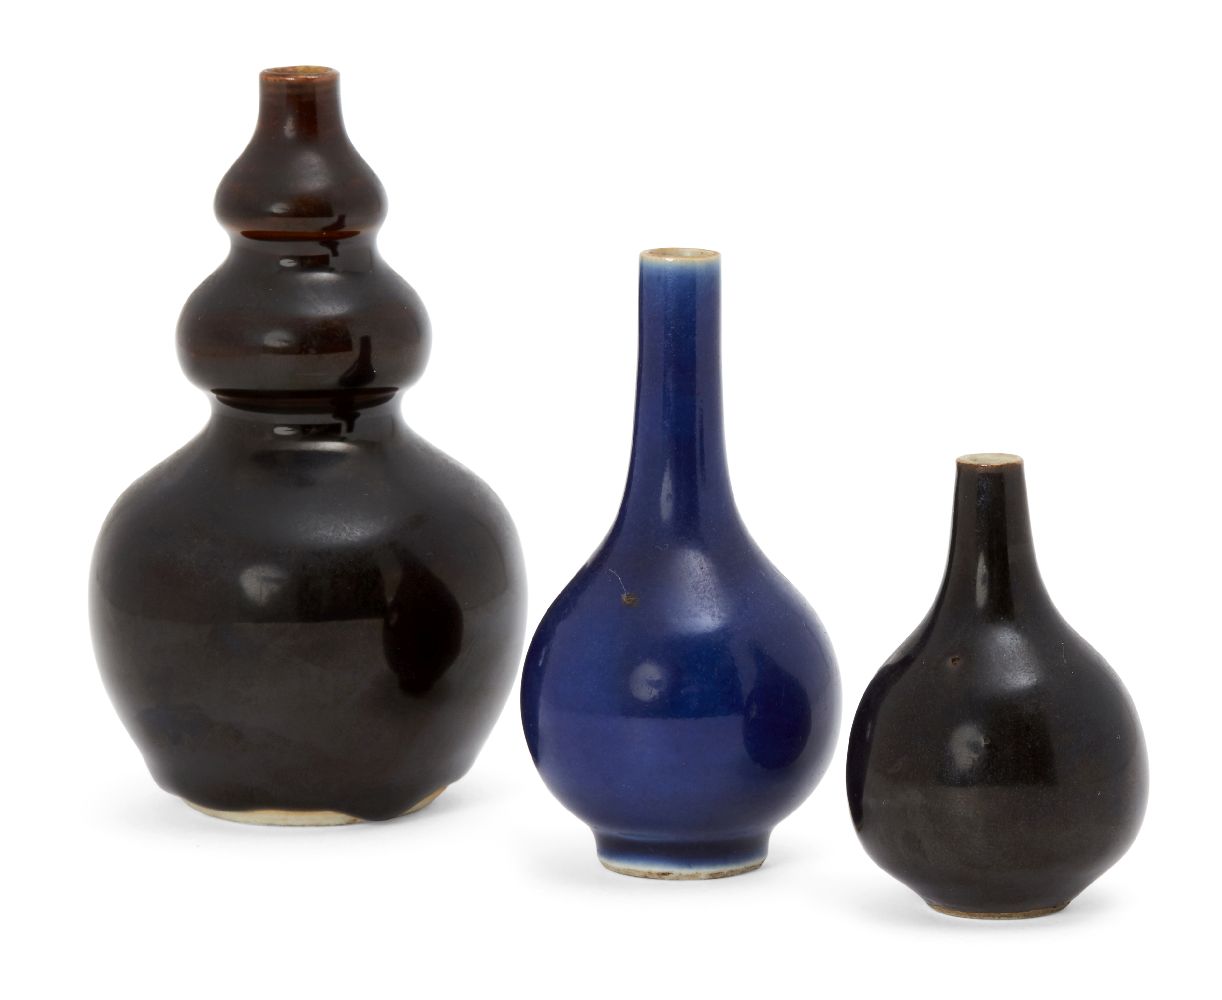 Three Chinese porcelain miniature monochrome vases, 18th - 19th century, comprising a sacrificial